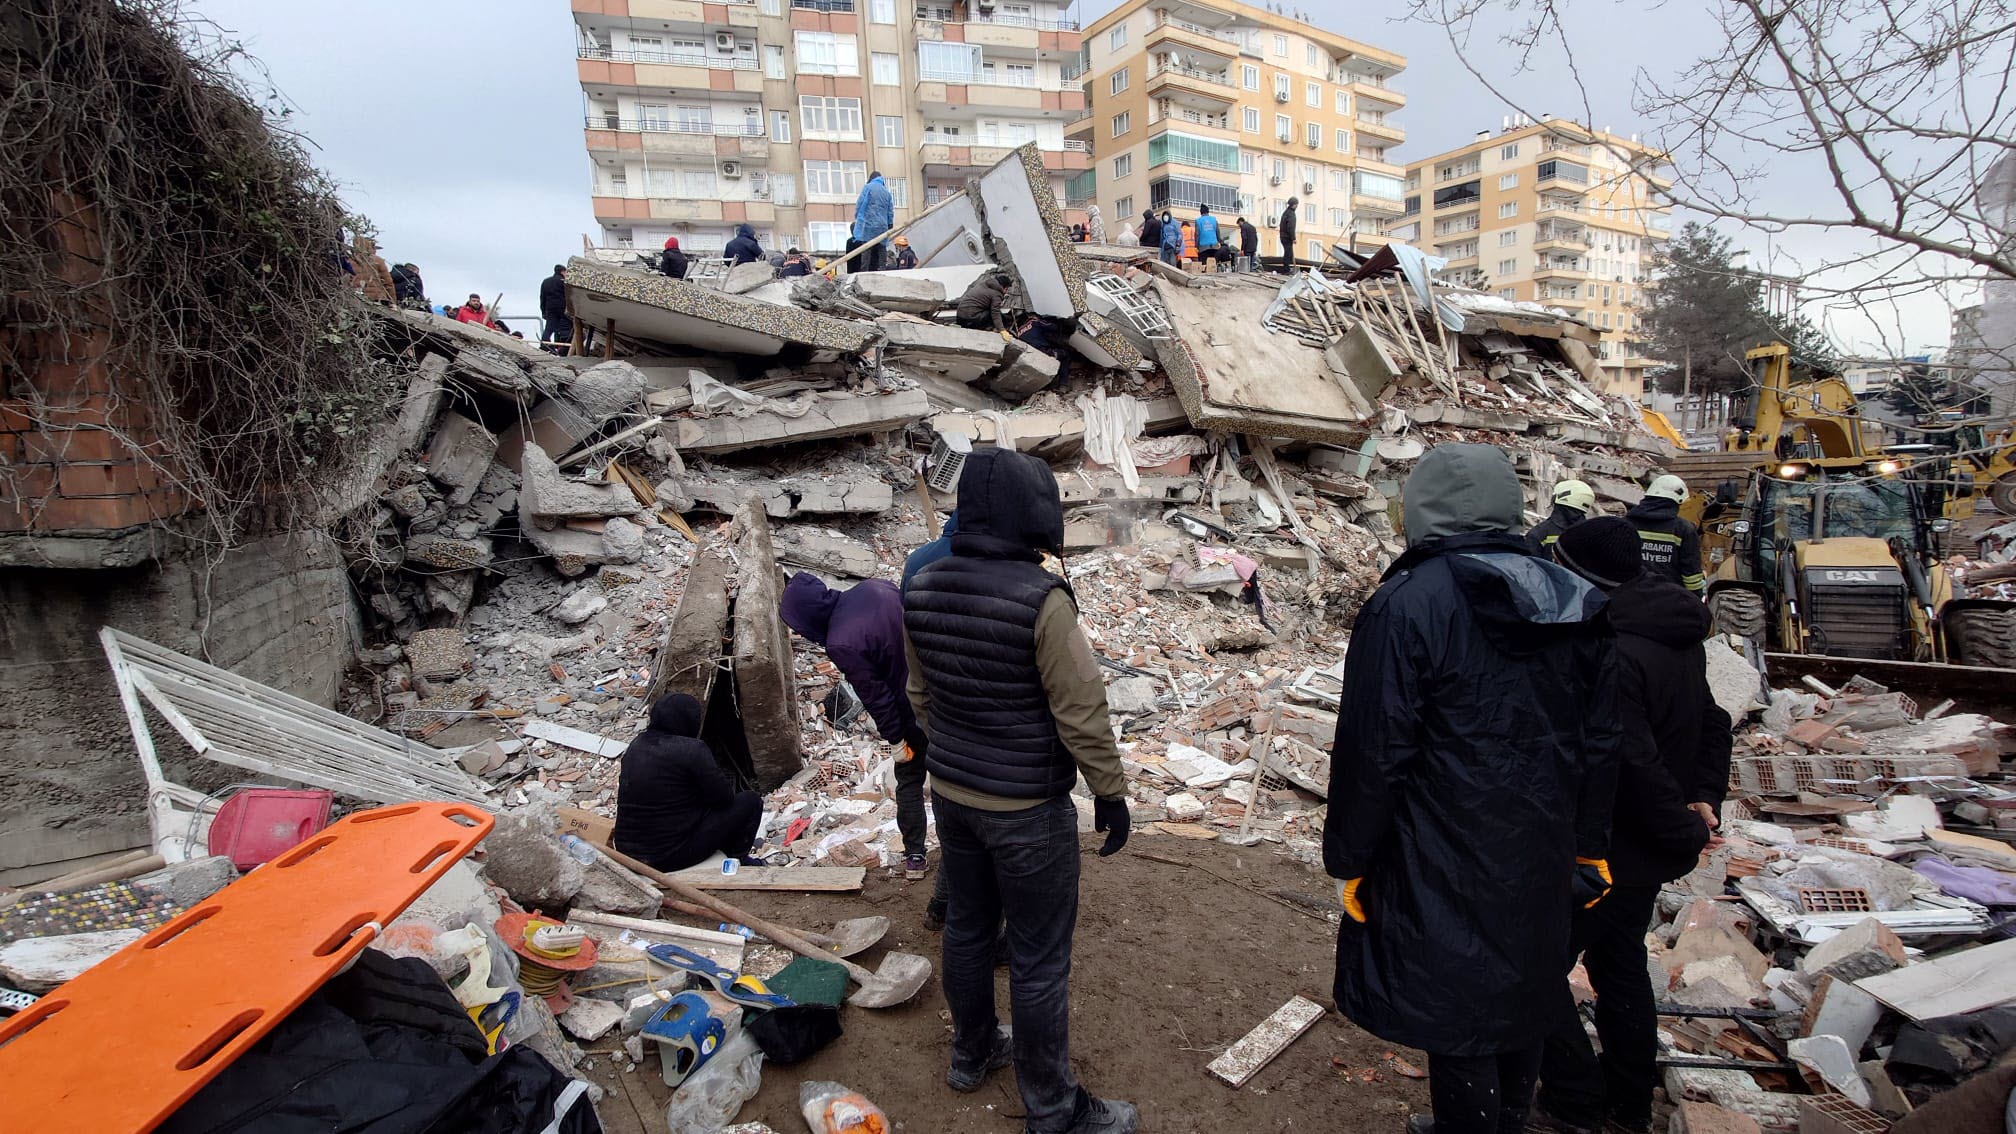 Heartbroken for home: Pehlivan, civil engineers grapple with tragic earthquakes in Turkey and Syria